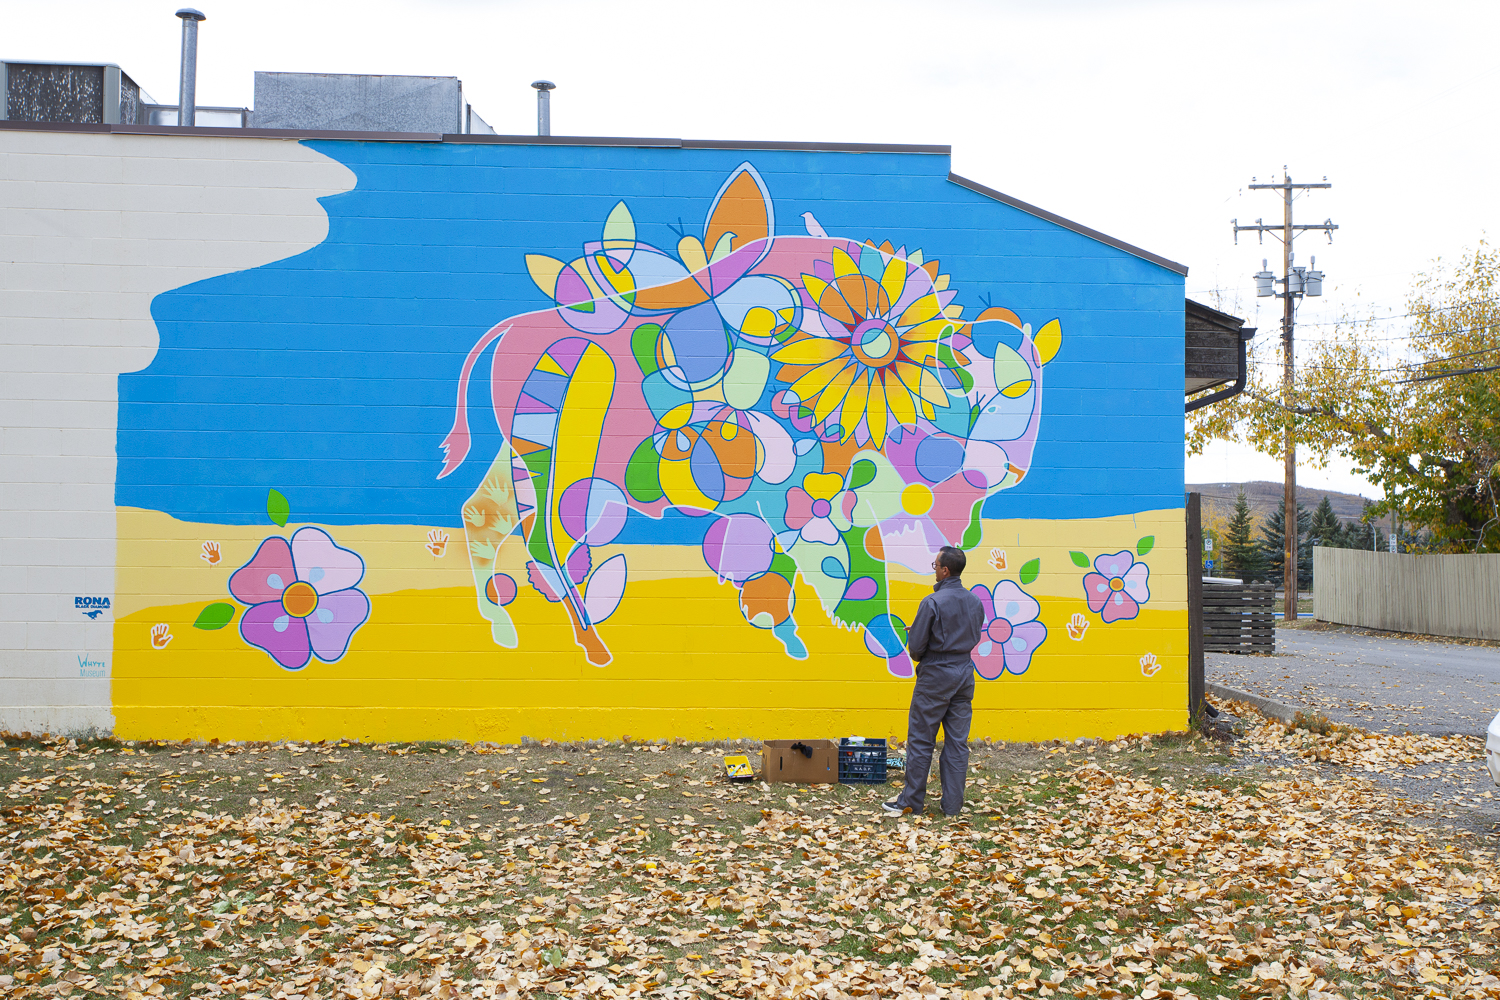 Bright blue and yellow mural by Bruno Canadien. The mural has vibrant imagery of a buffalo and florals with orange handprints